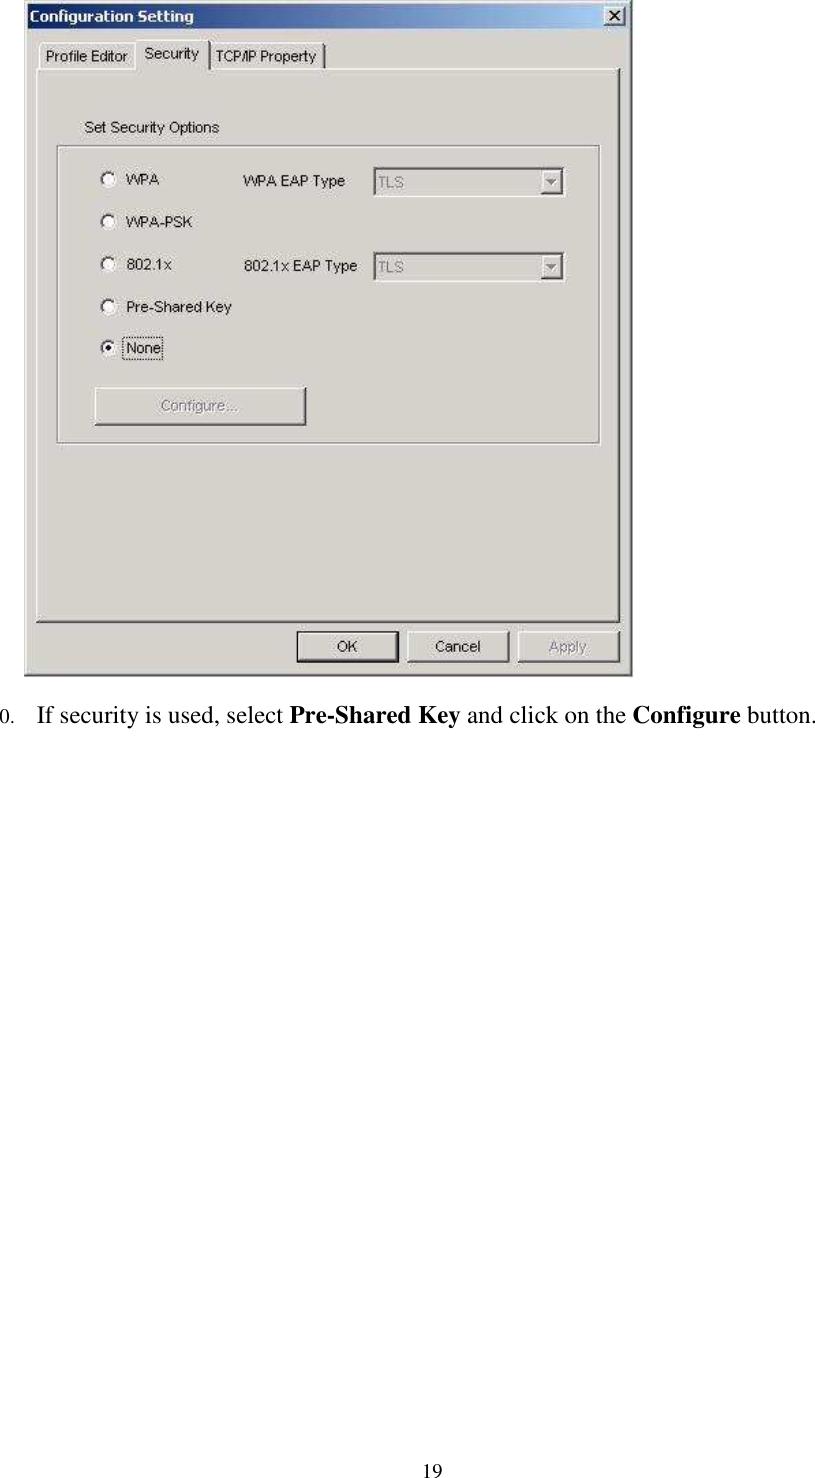   19     0. If security is used, select Pre-Shared Key and click on the Configure button.  